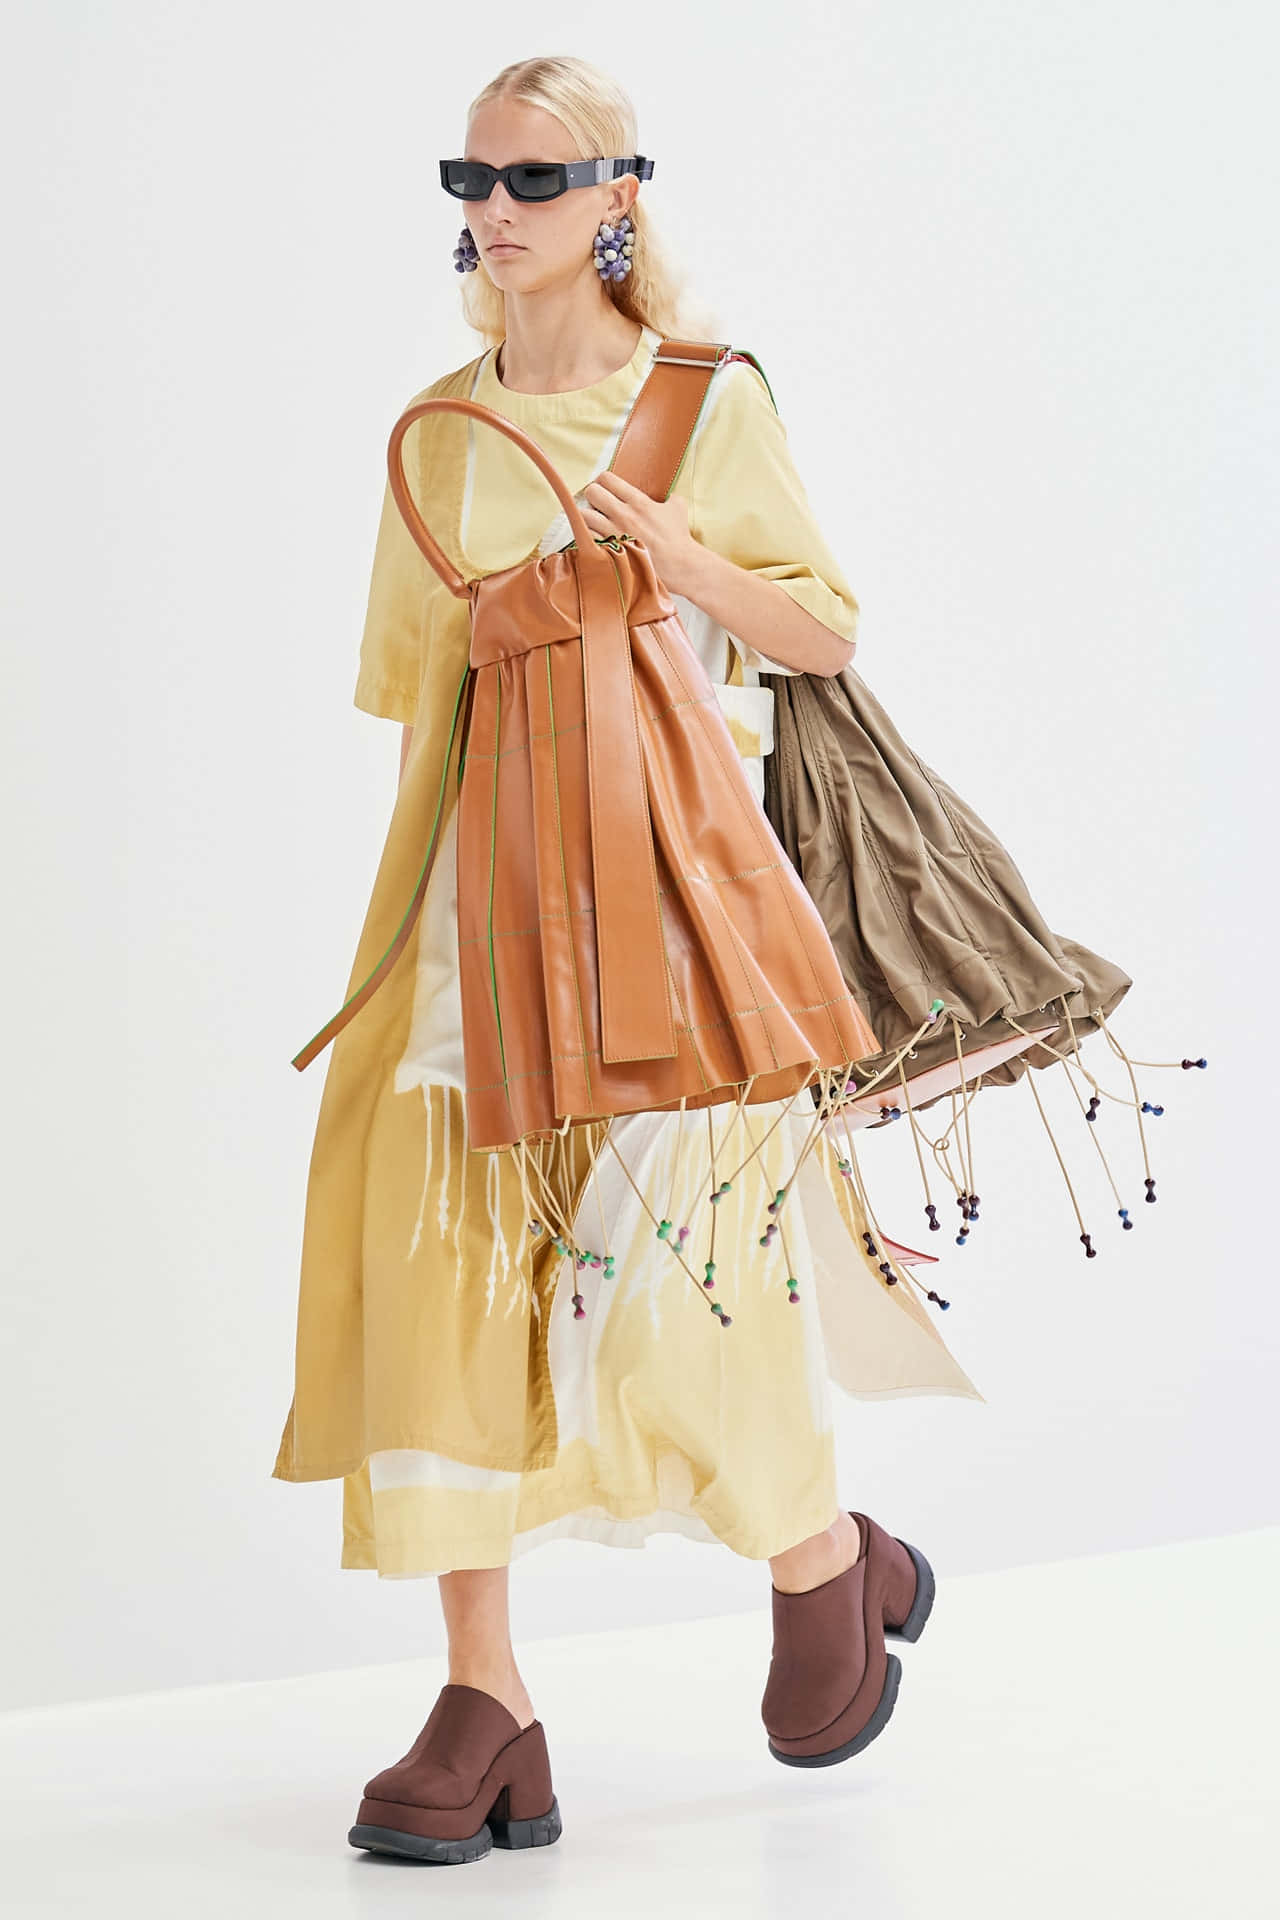 Yellow And Brown-outfit Sunnei Spring 2020 Collection Wallpaper